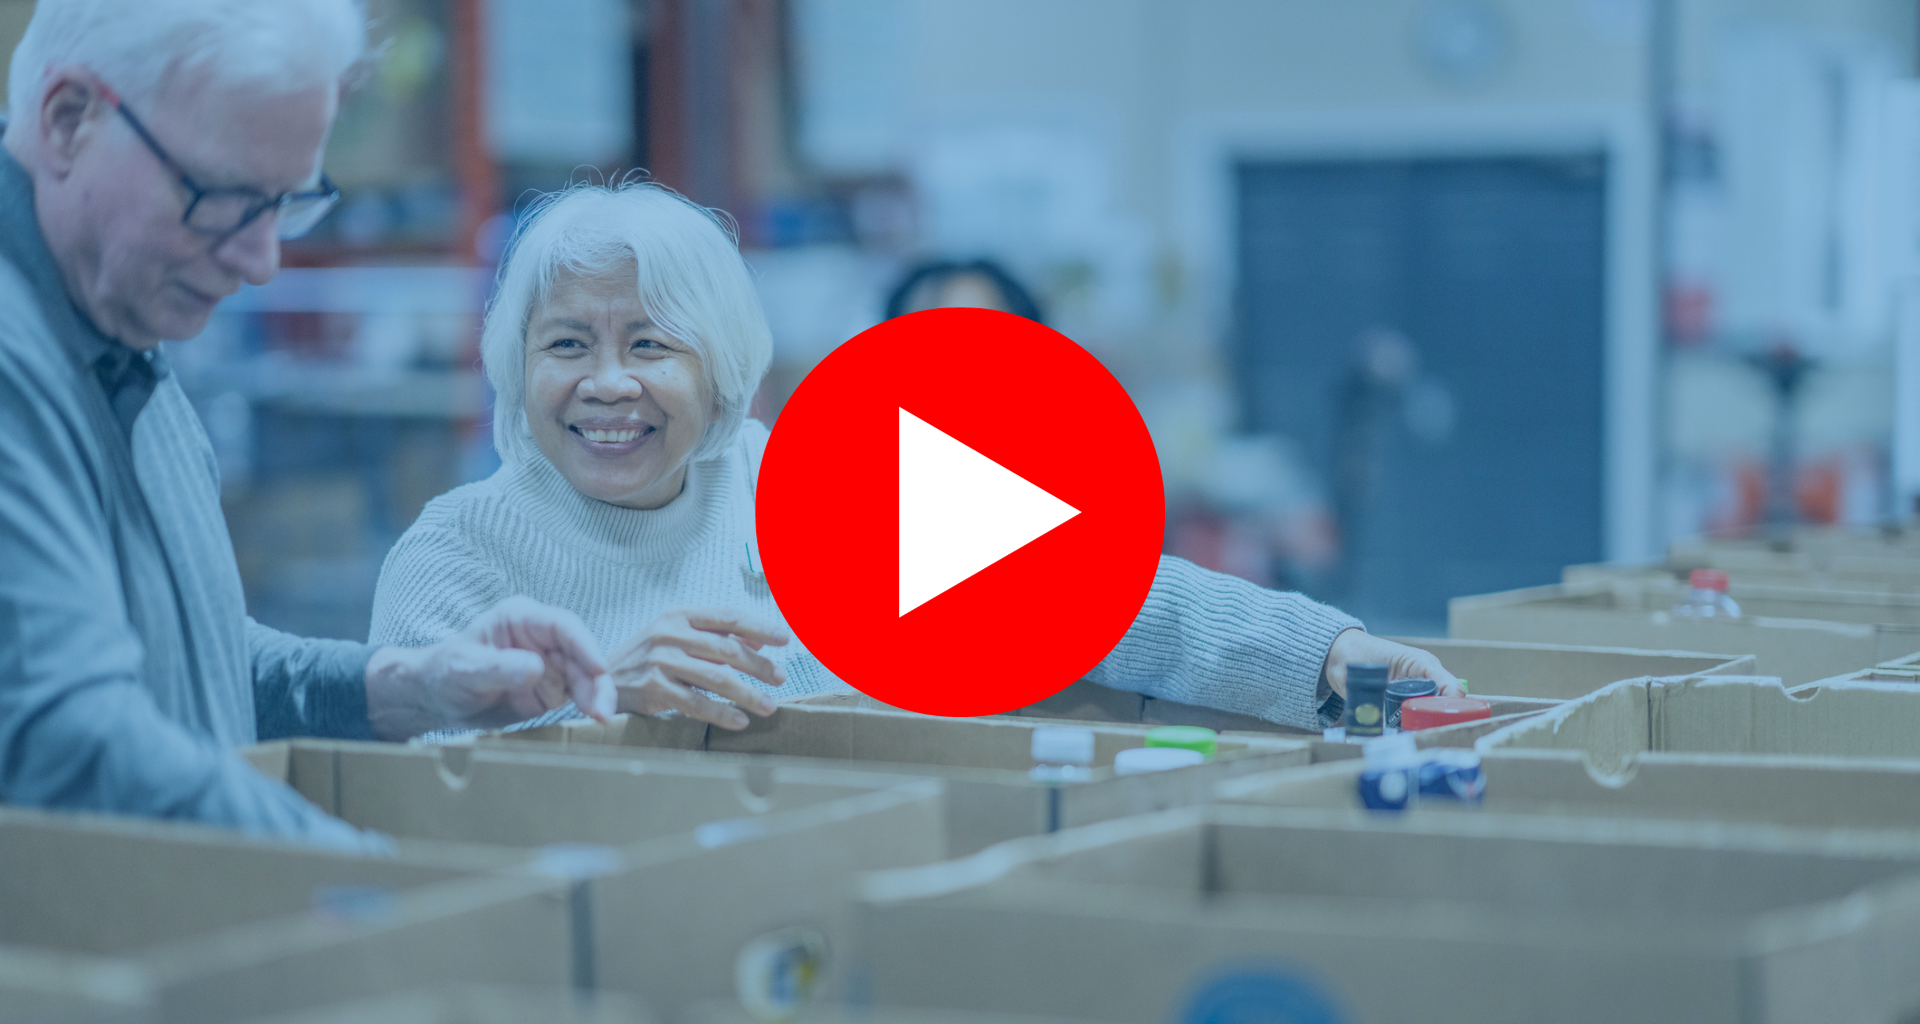 A senior gentleman and his wife work together as they pass food items between them and work to sort and pack boxes at a local Food Bank. They are both dressed casually and are smiling at one another as they enjoy their volunteer time together. |